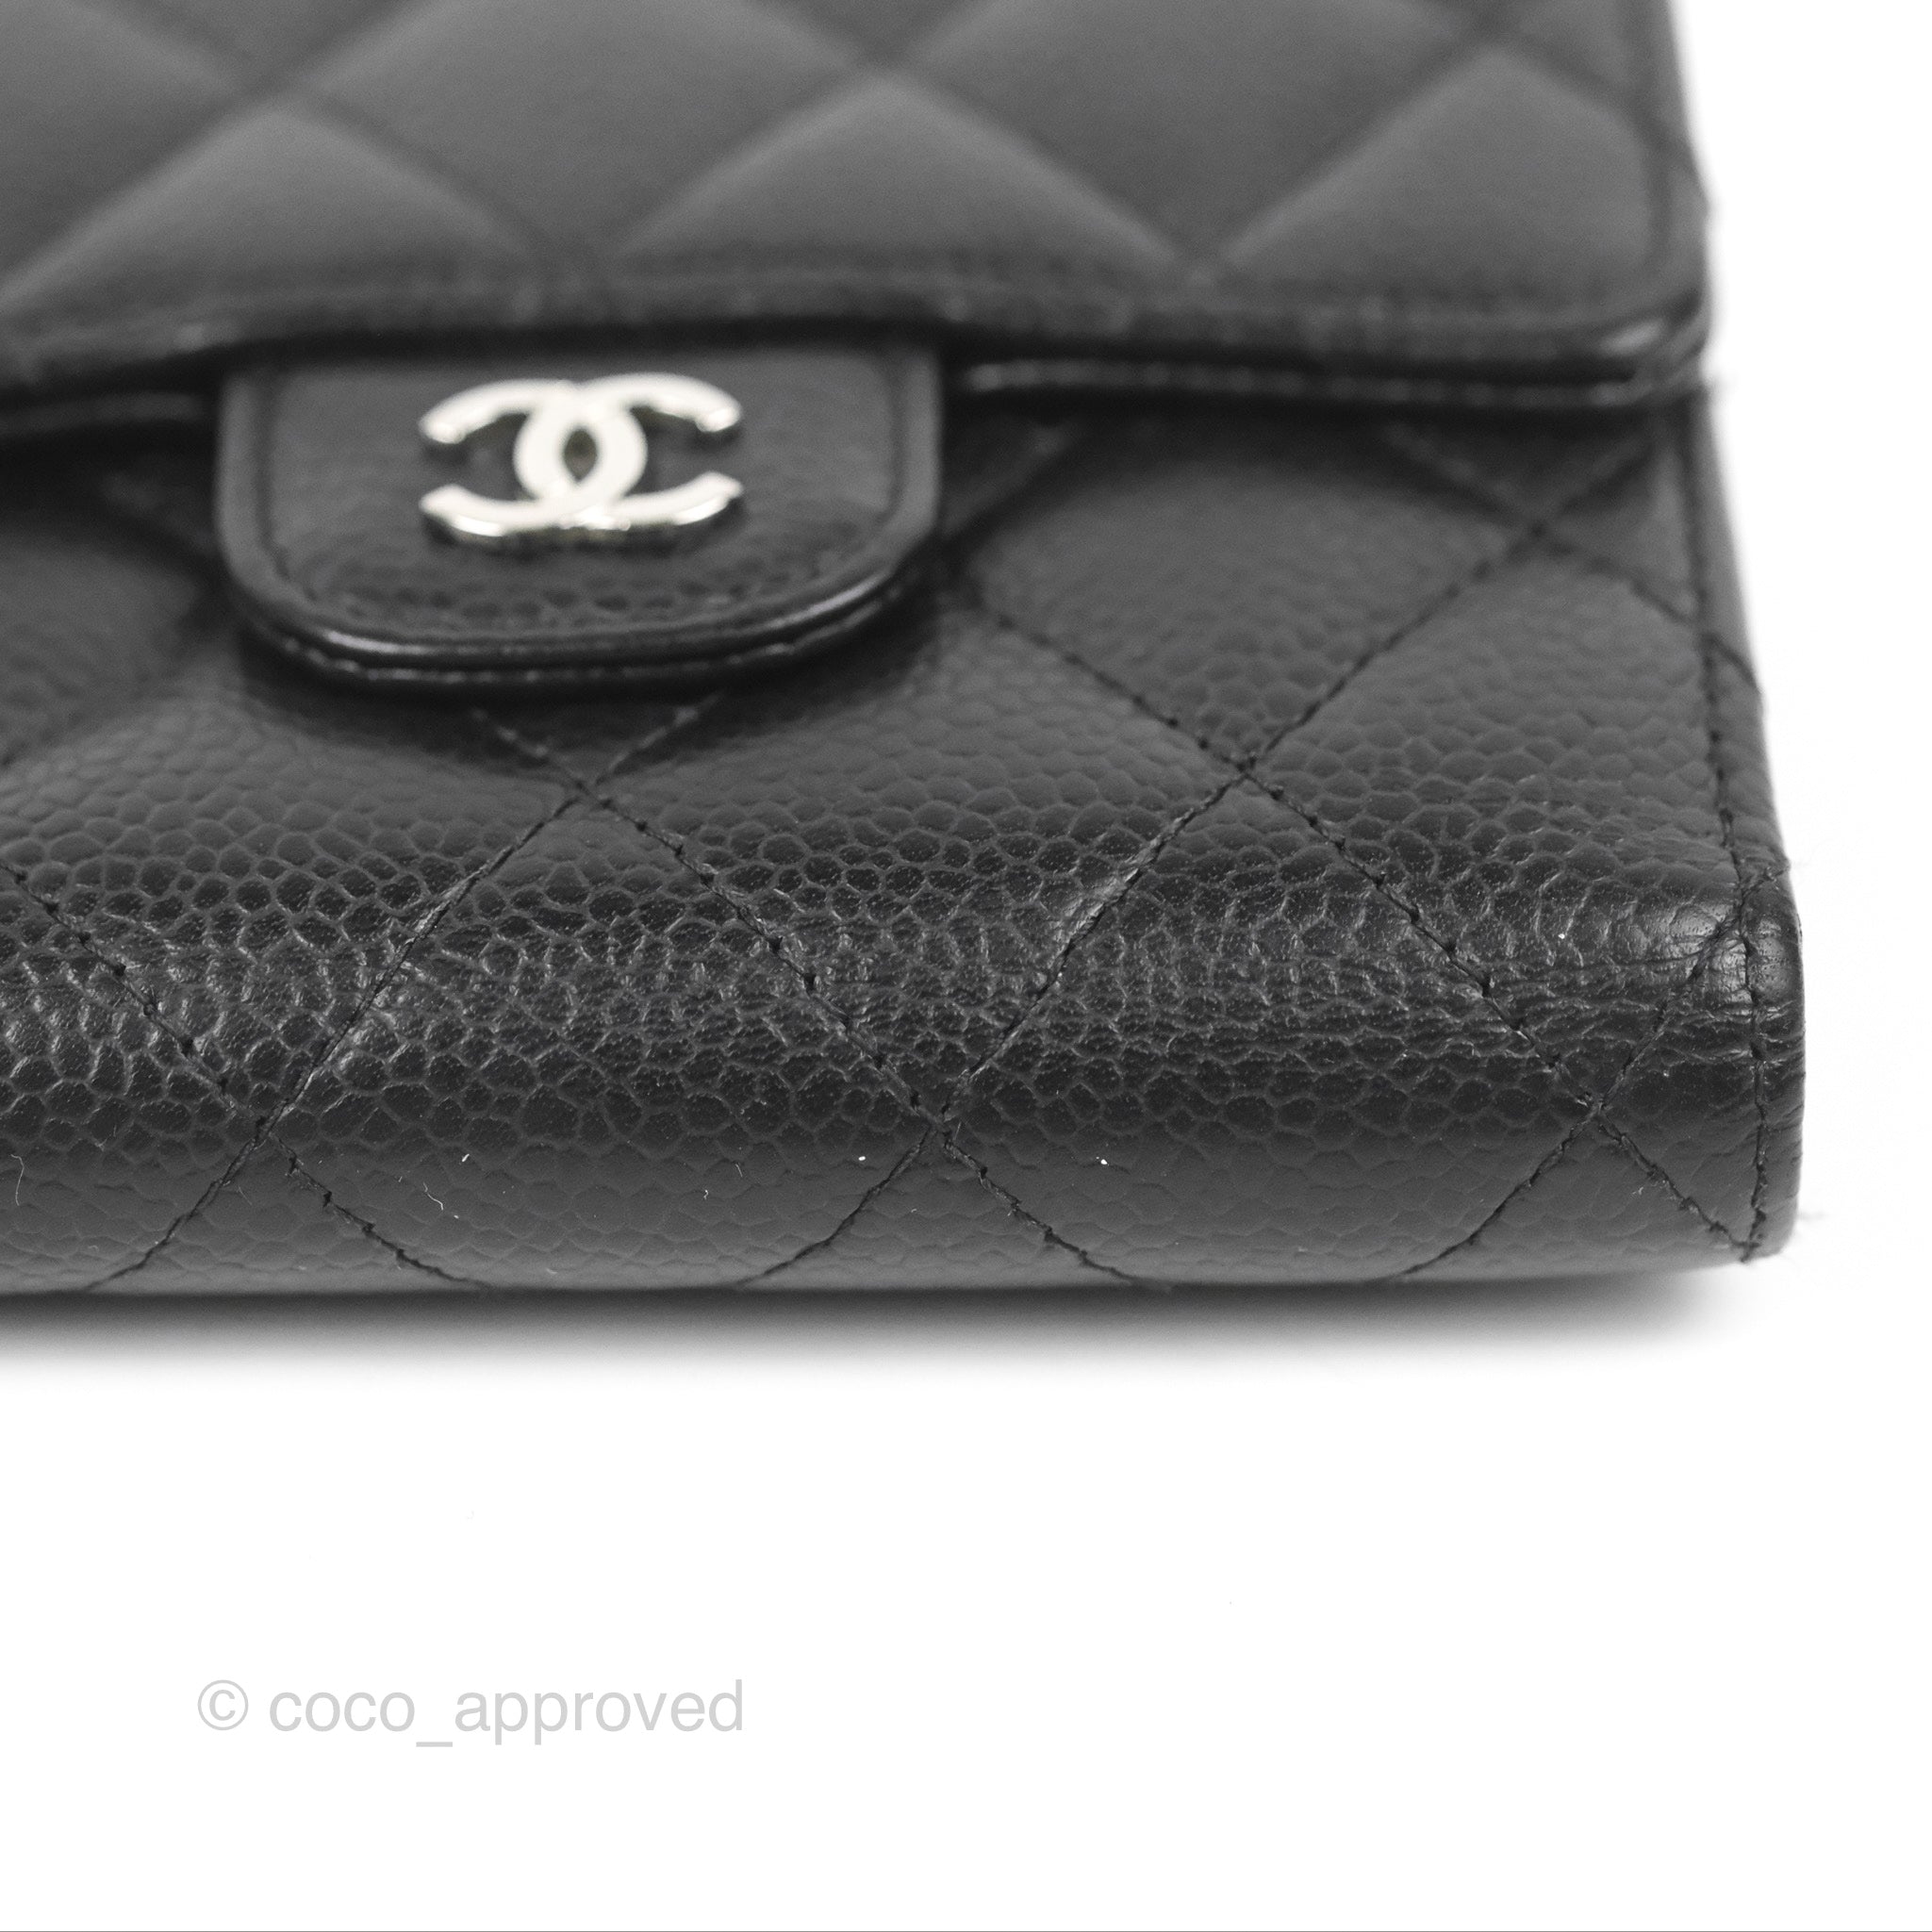 Chanel Quilted Small Boy Flap Wallet Black Caviar Gold Hardware